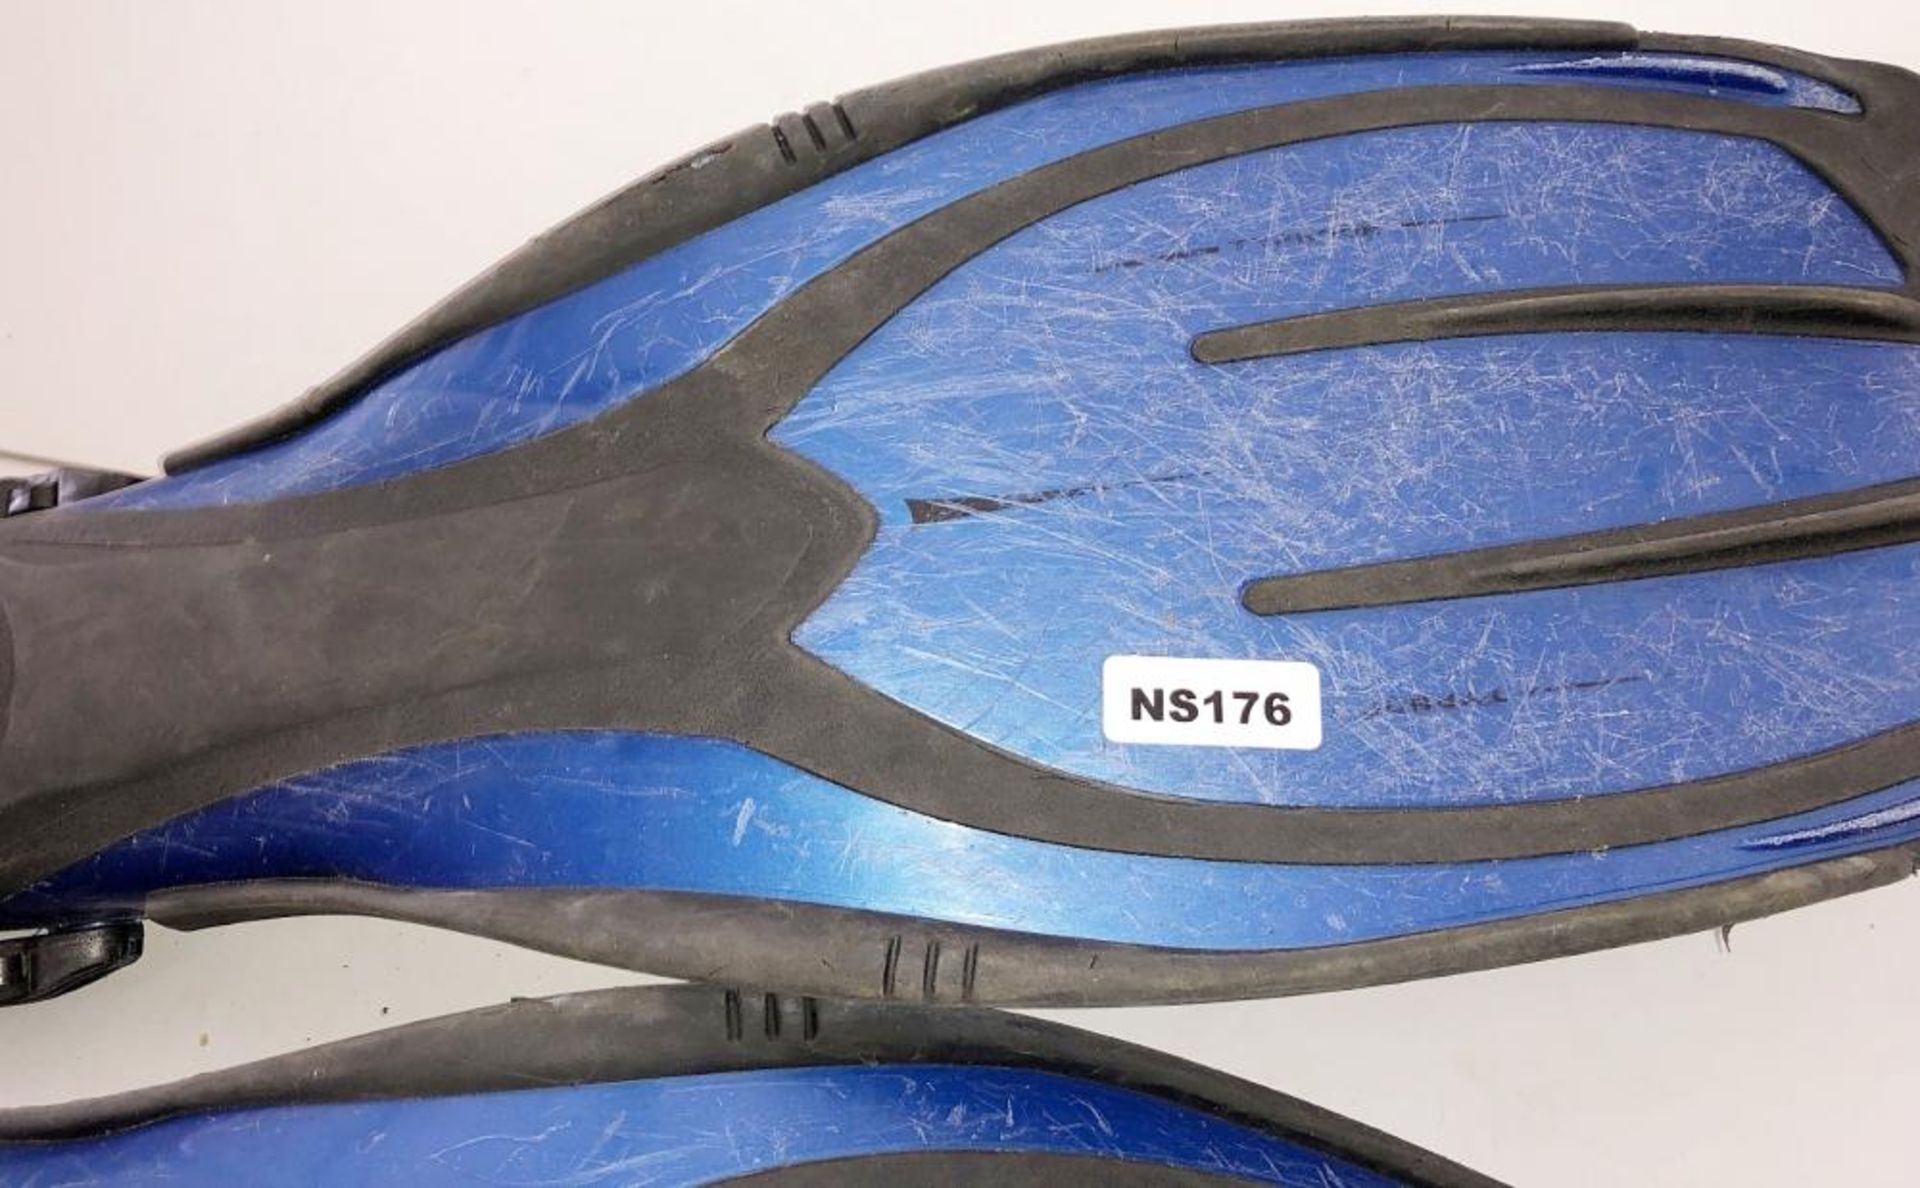 5 x Pairs Of Branded Diving Fins - Ref: NS175, NS176, NS177, NS178, NS179, NS180, NS181, NS182, NS18 - Image 3 of 17